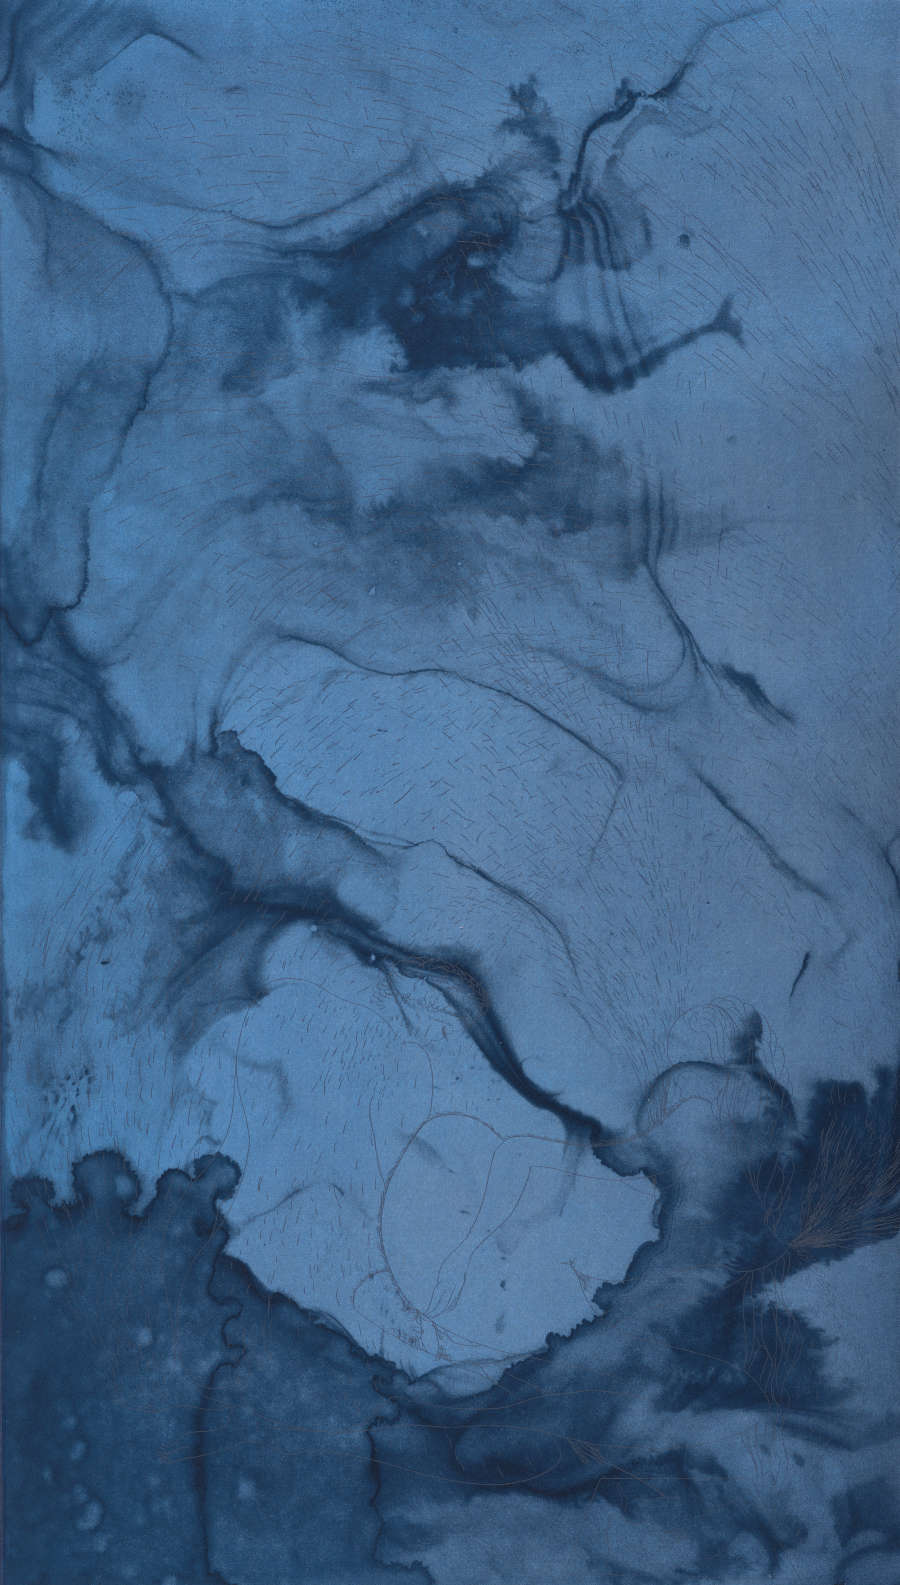 More dark blue inky marbling, which forms large organic forms as well as thin meandering lines which bloom and blend into the blue dyed paper.